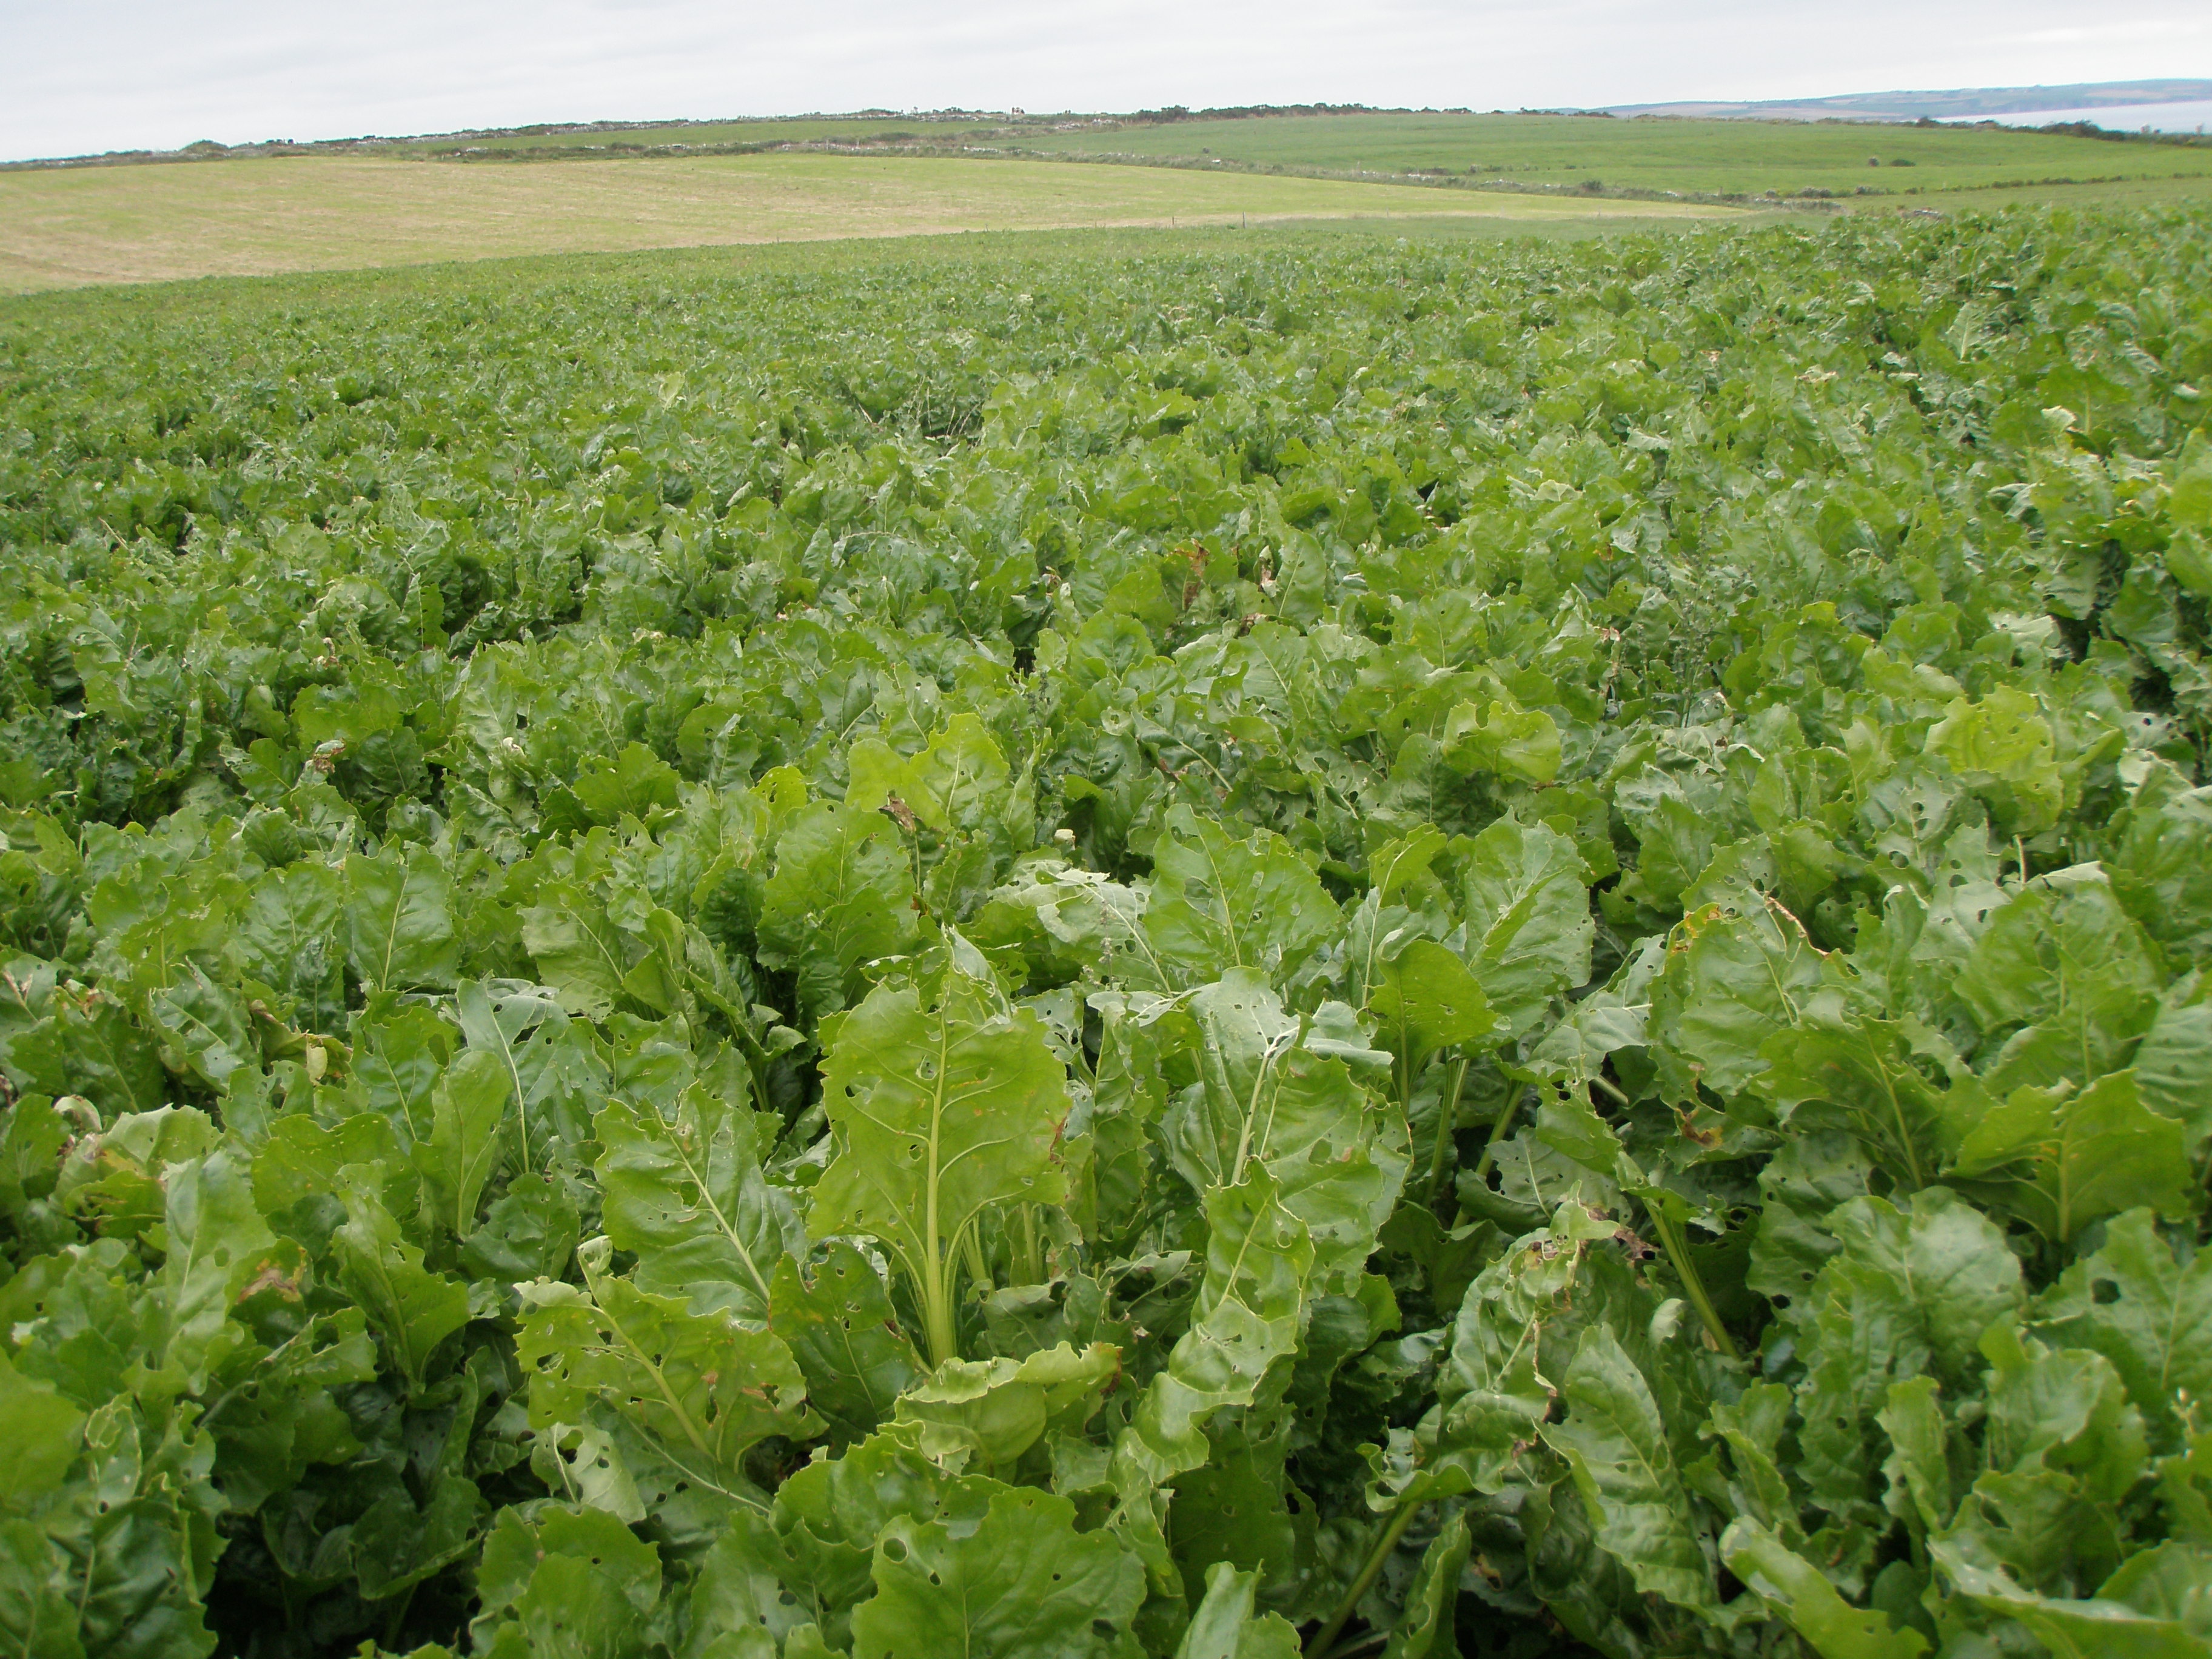 Beet Crop sown for geeseImage by Michael Martyn